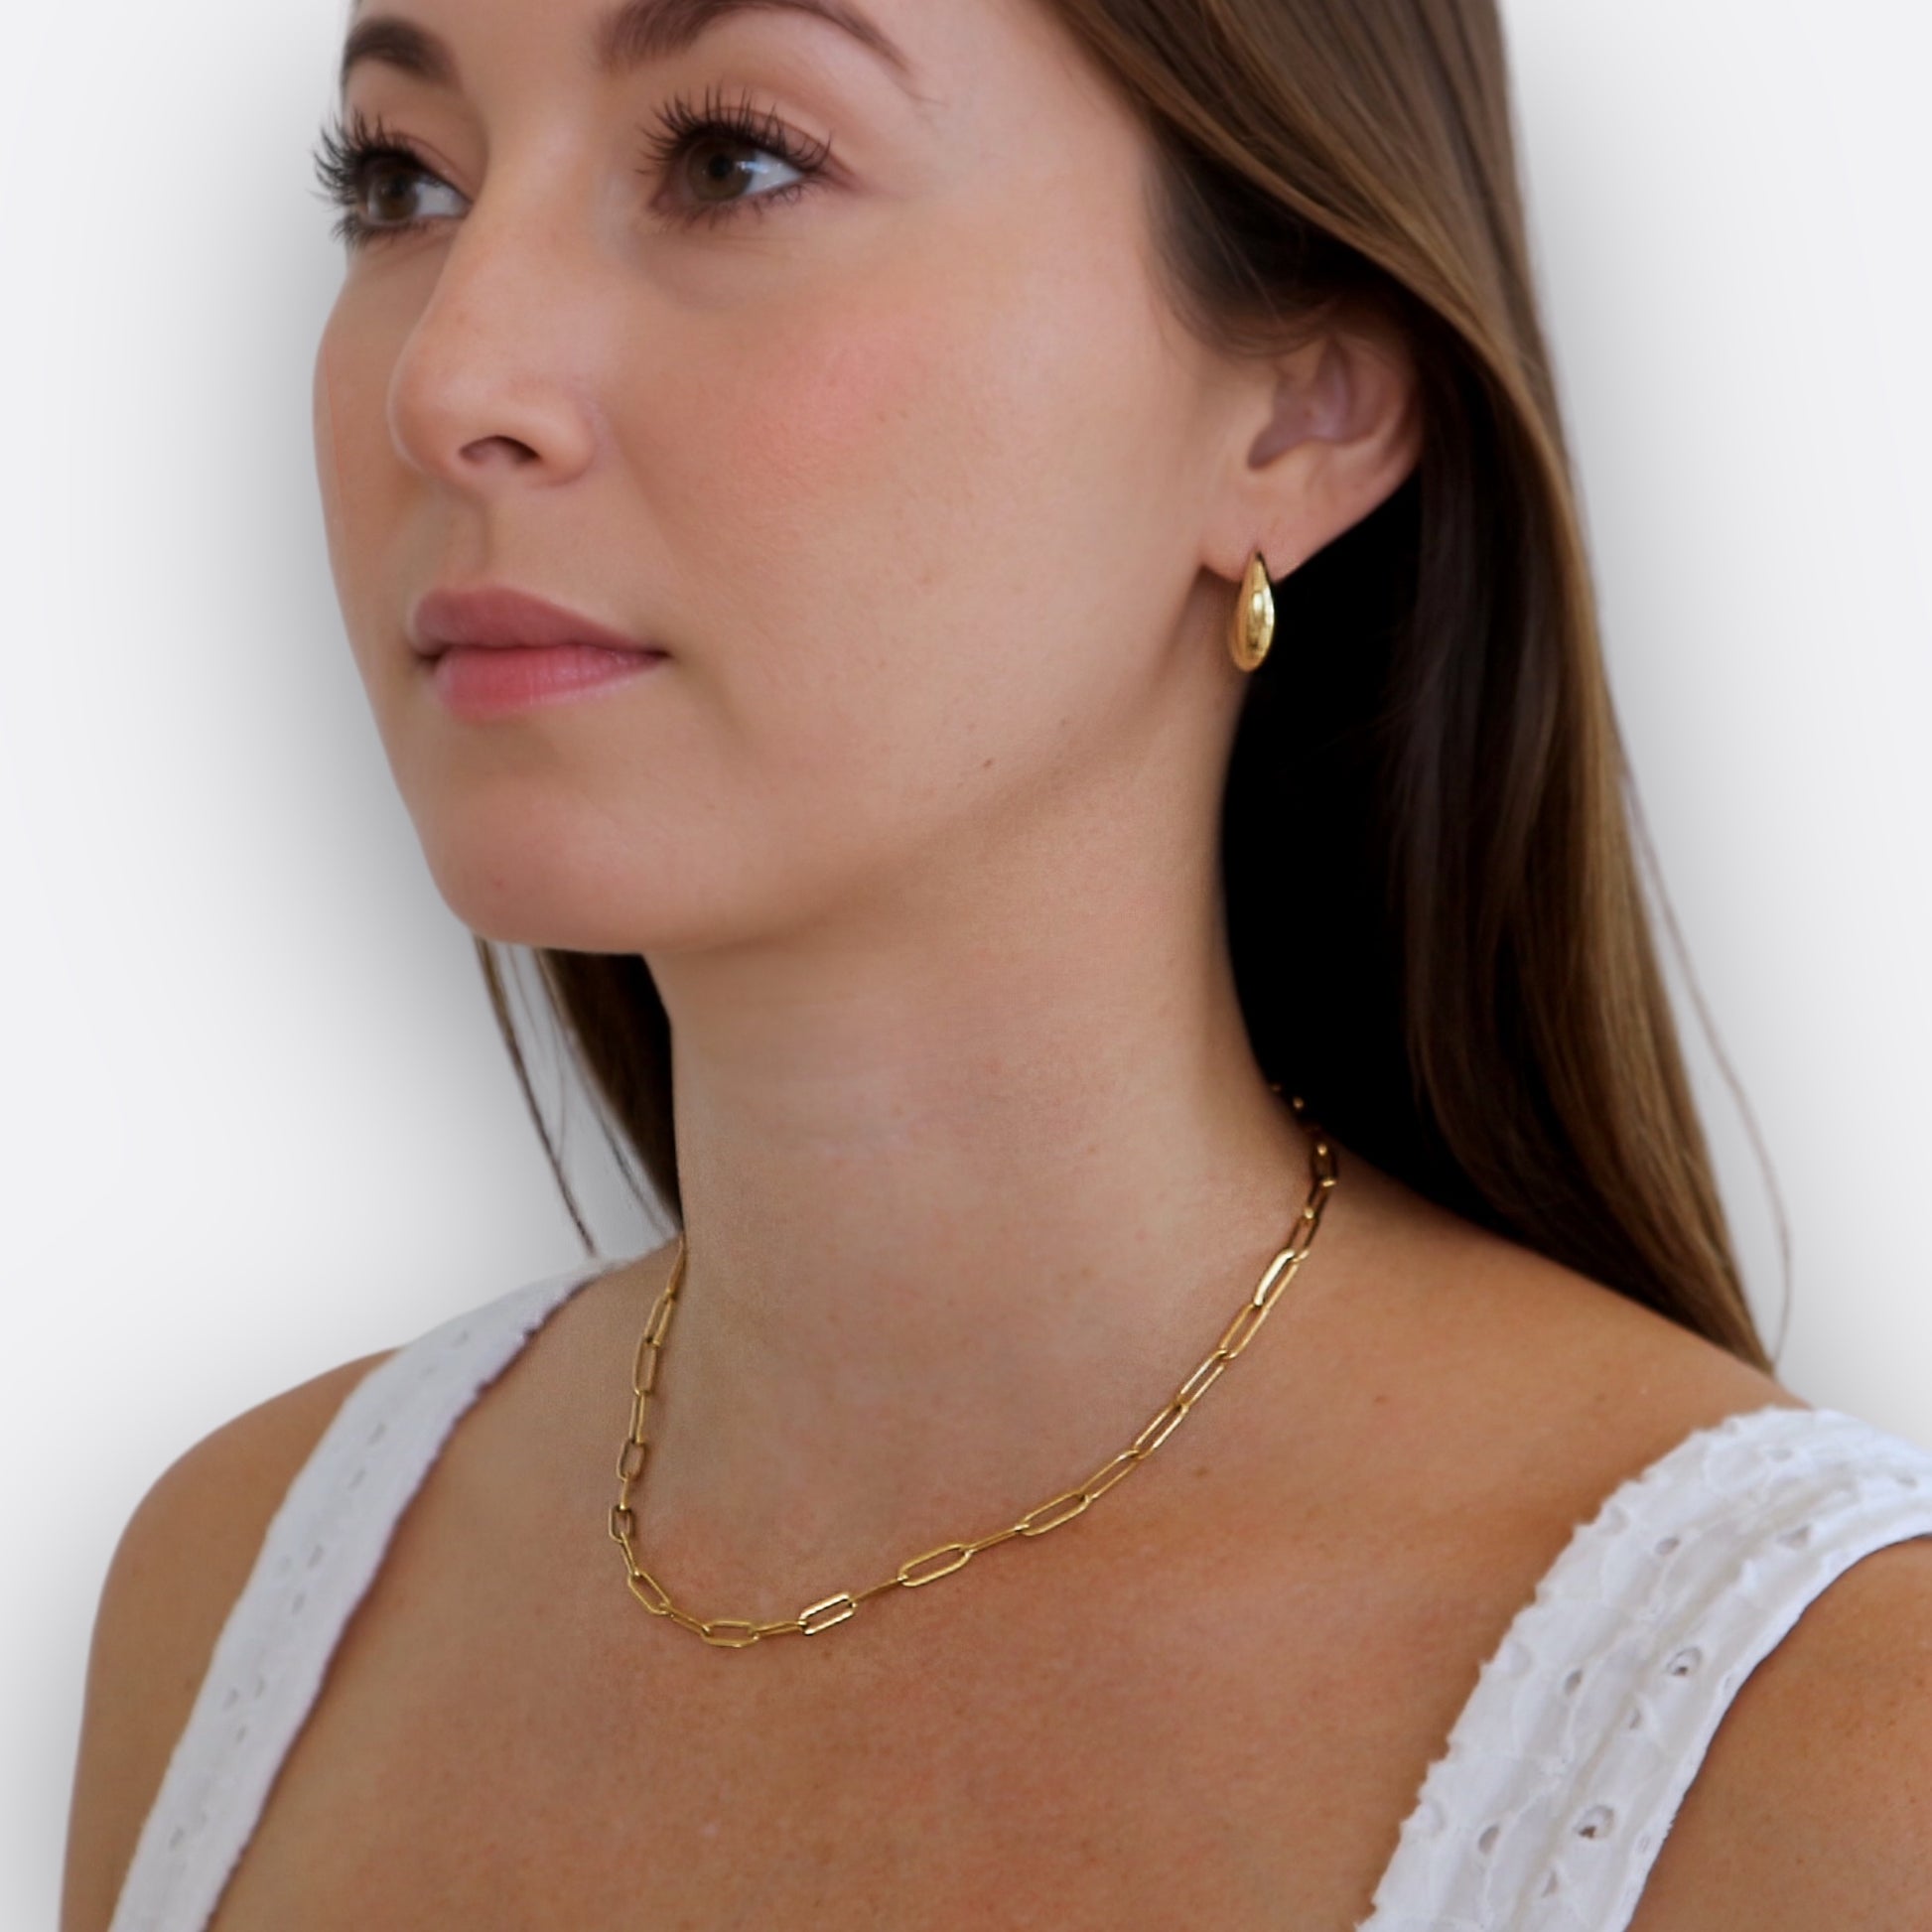 brunette girl showing her profile wearing gold earrigs, paperclip necklace and a white tank. white background